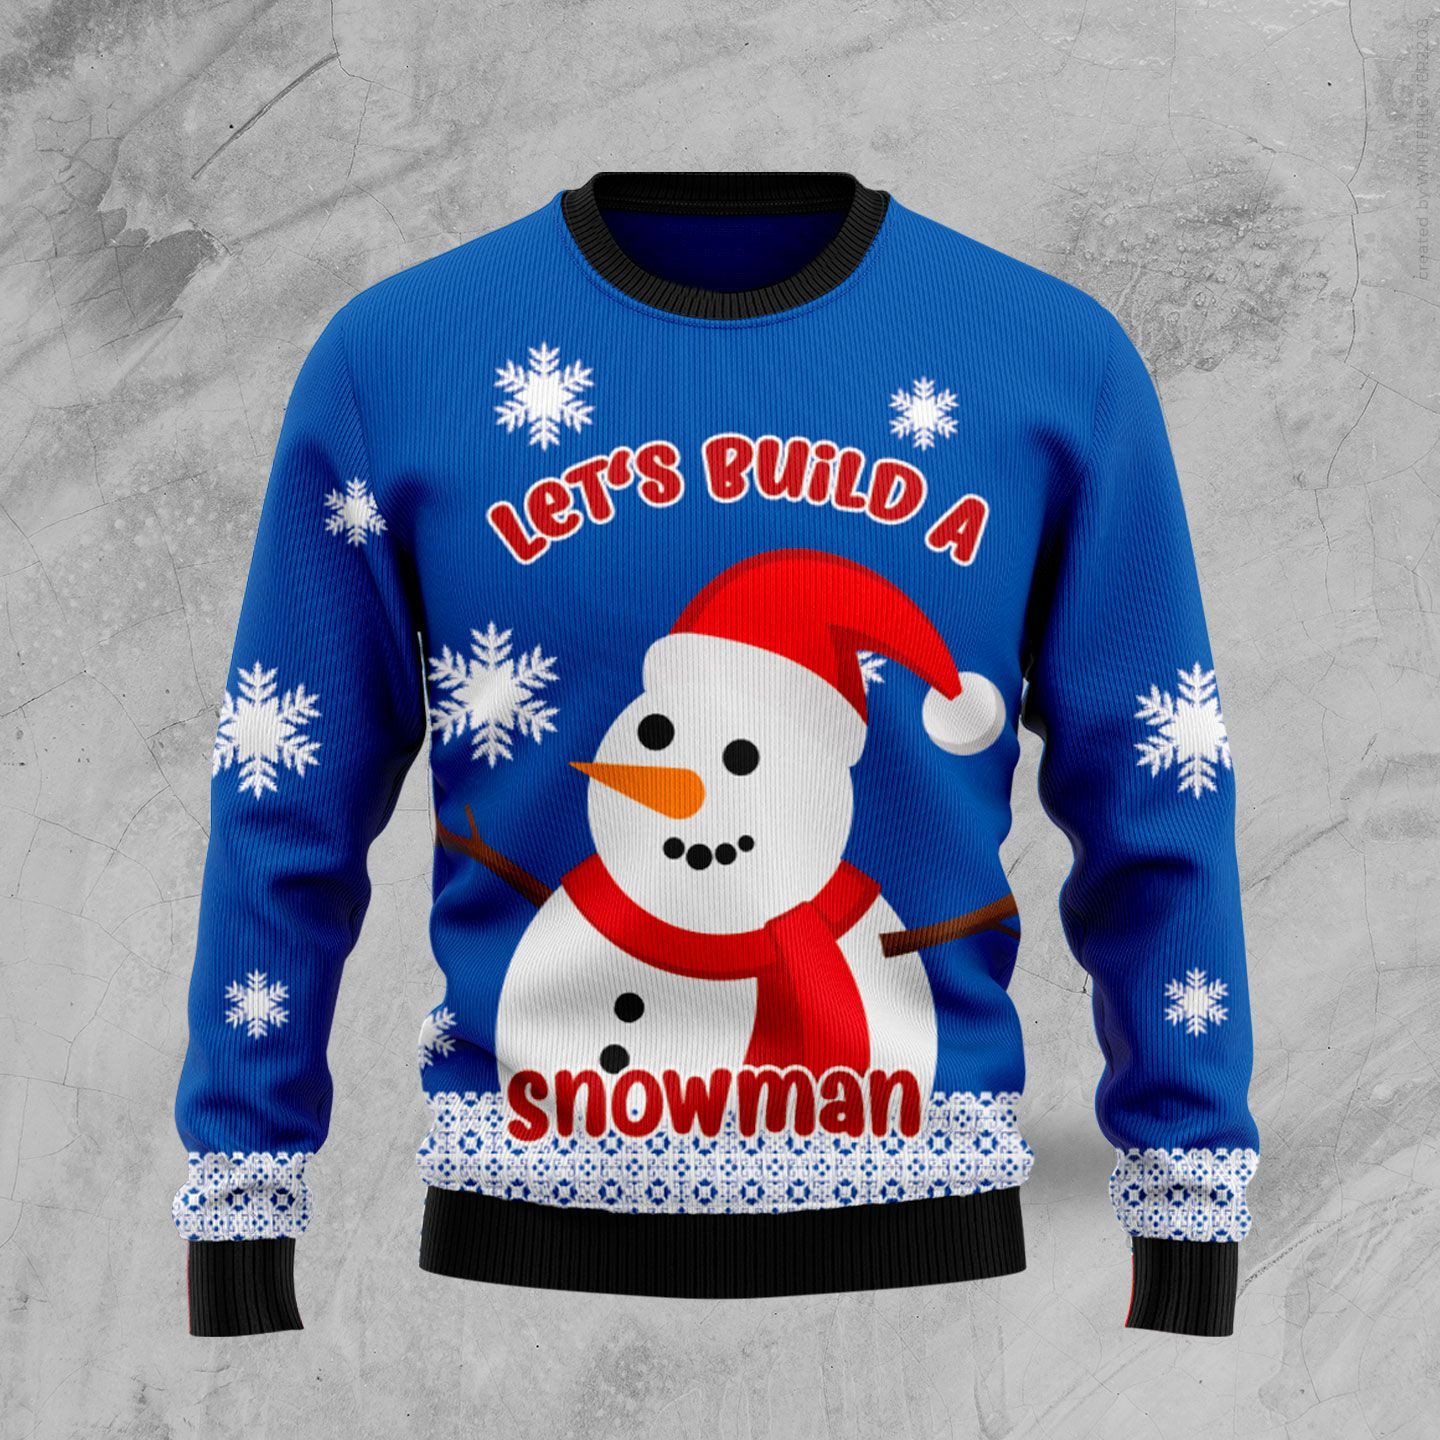 Lets Build A Snowman Ugly Christmas Sweater Ugly Sweater For Men Women, Holiday Sweater